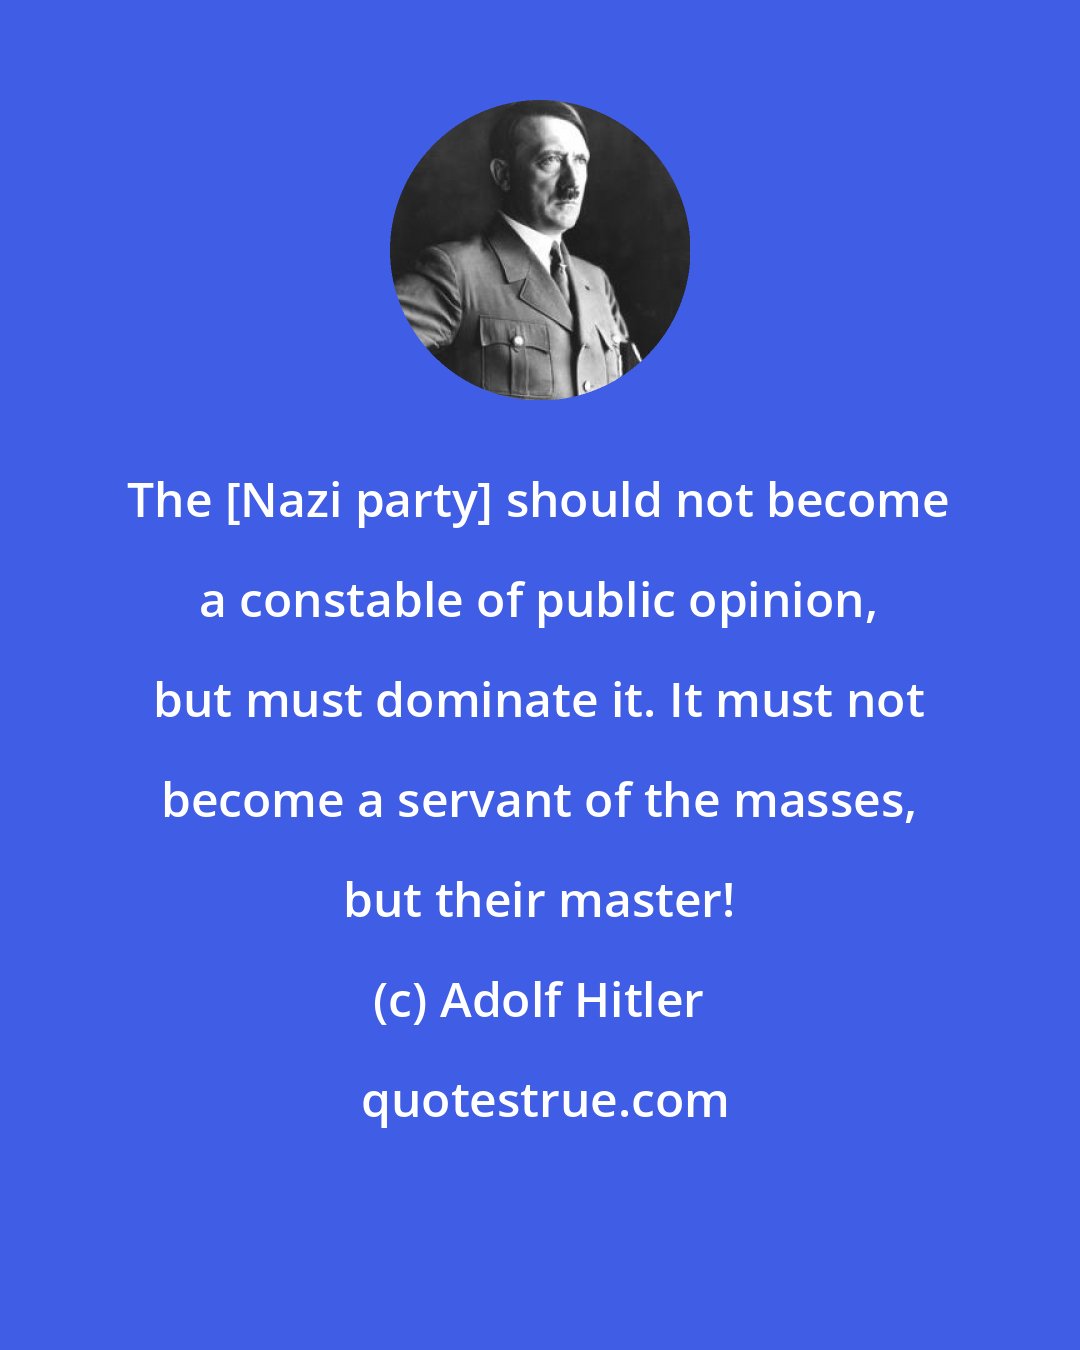 Adolf Hitler: The [Nazi party] should not become a constable of public opinion, but must dominate it. It must not become a servant of the masses, but their master!